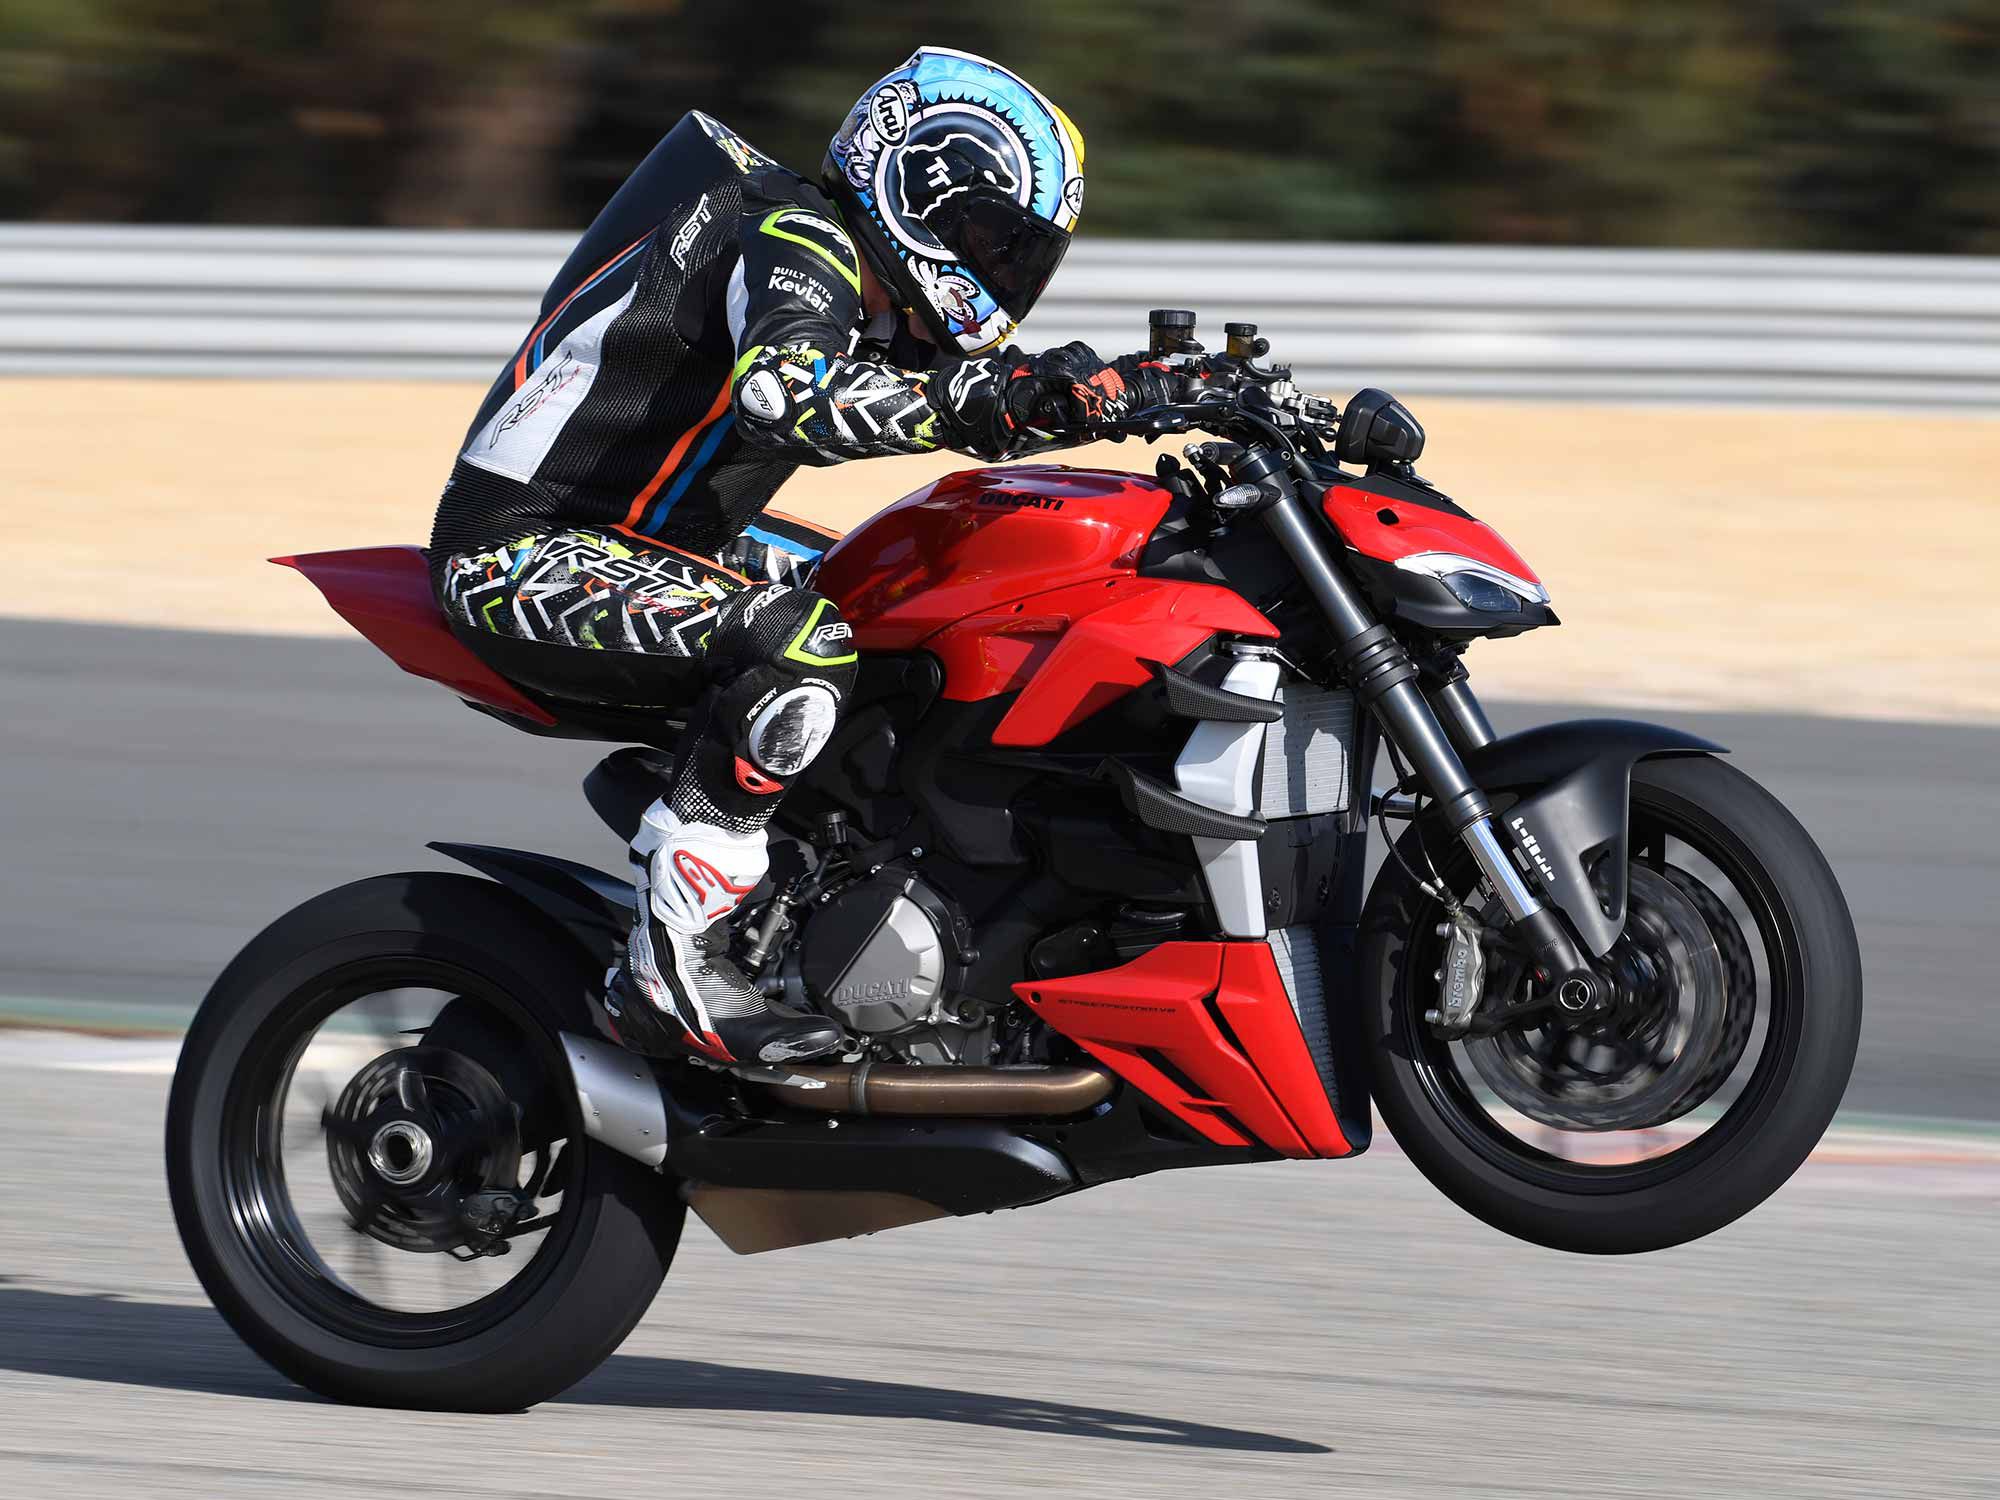 Visually, the fork appears the same as the Panigale’s but carries more open settings for road riding and comfort. The rear Sachs setup is close to the Panigale’s, too, but now the shock has more movement because the swingarm is 0.63 inch longer.